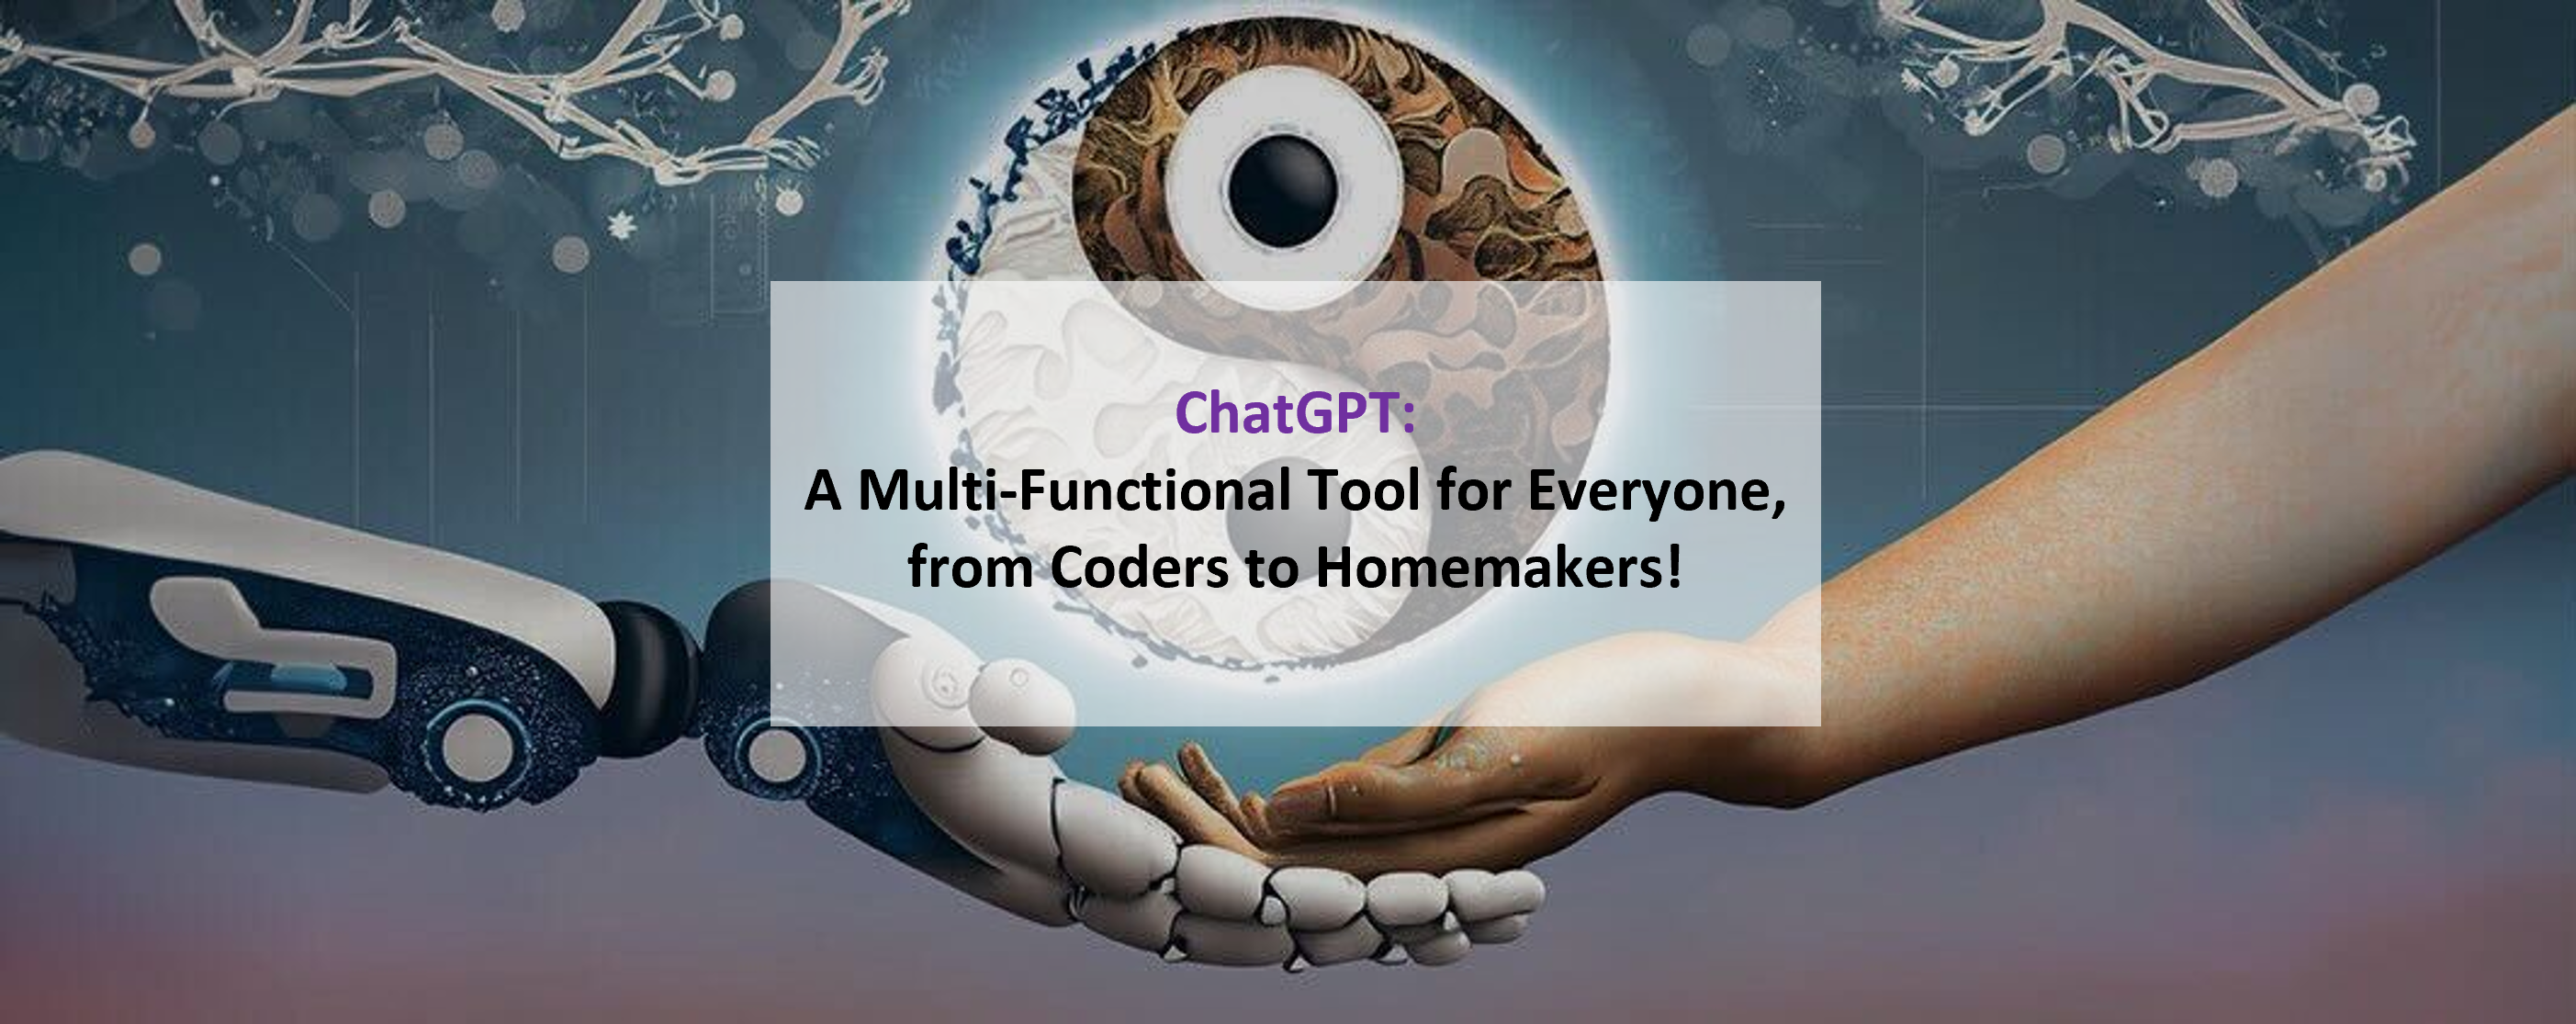 ChatGPT: For Every User, Every Need